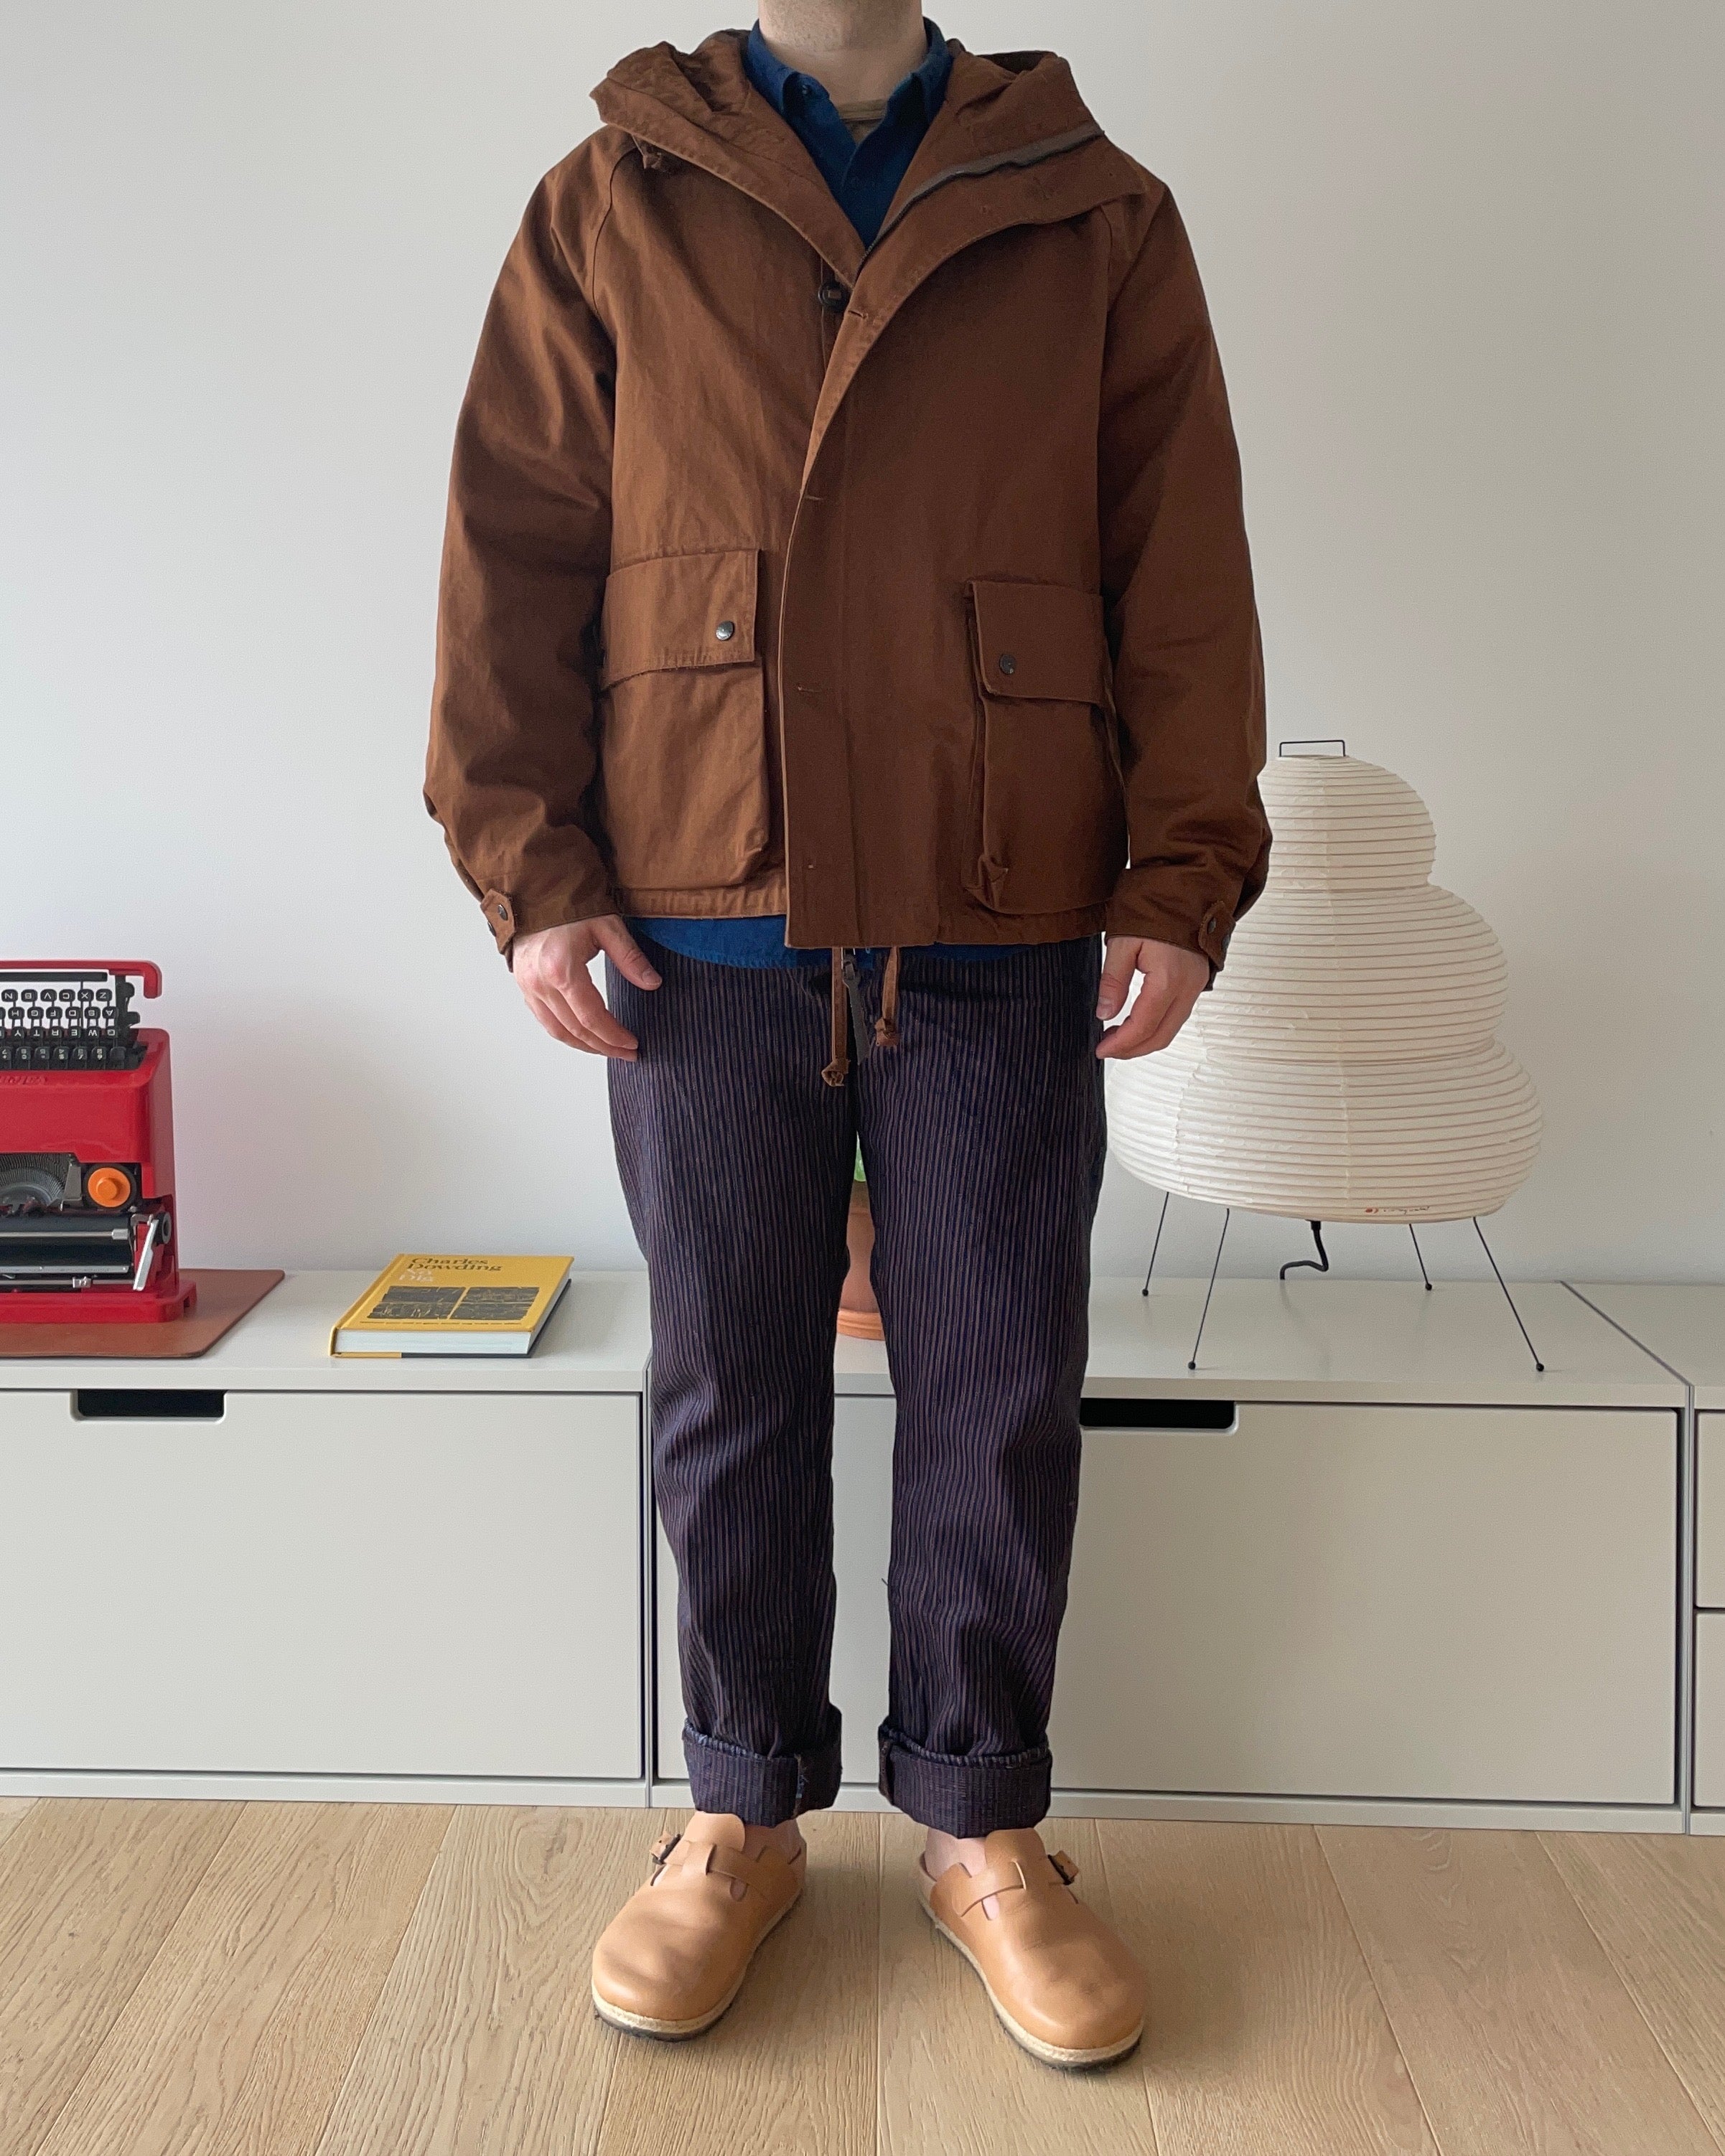 Design Brown – TEMPO - Foul Store EASTLOGUE Parka in Backsatin Weather Tempo